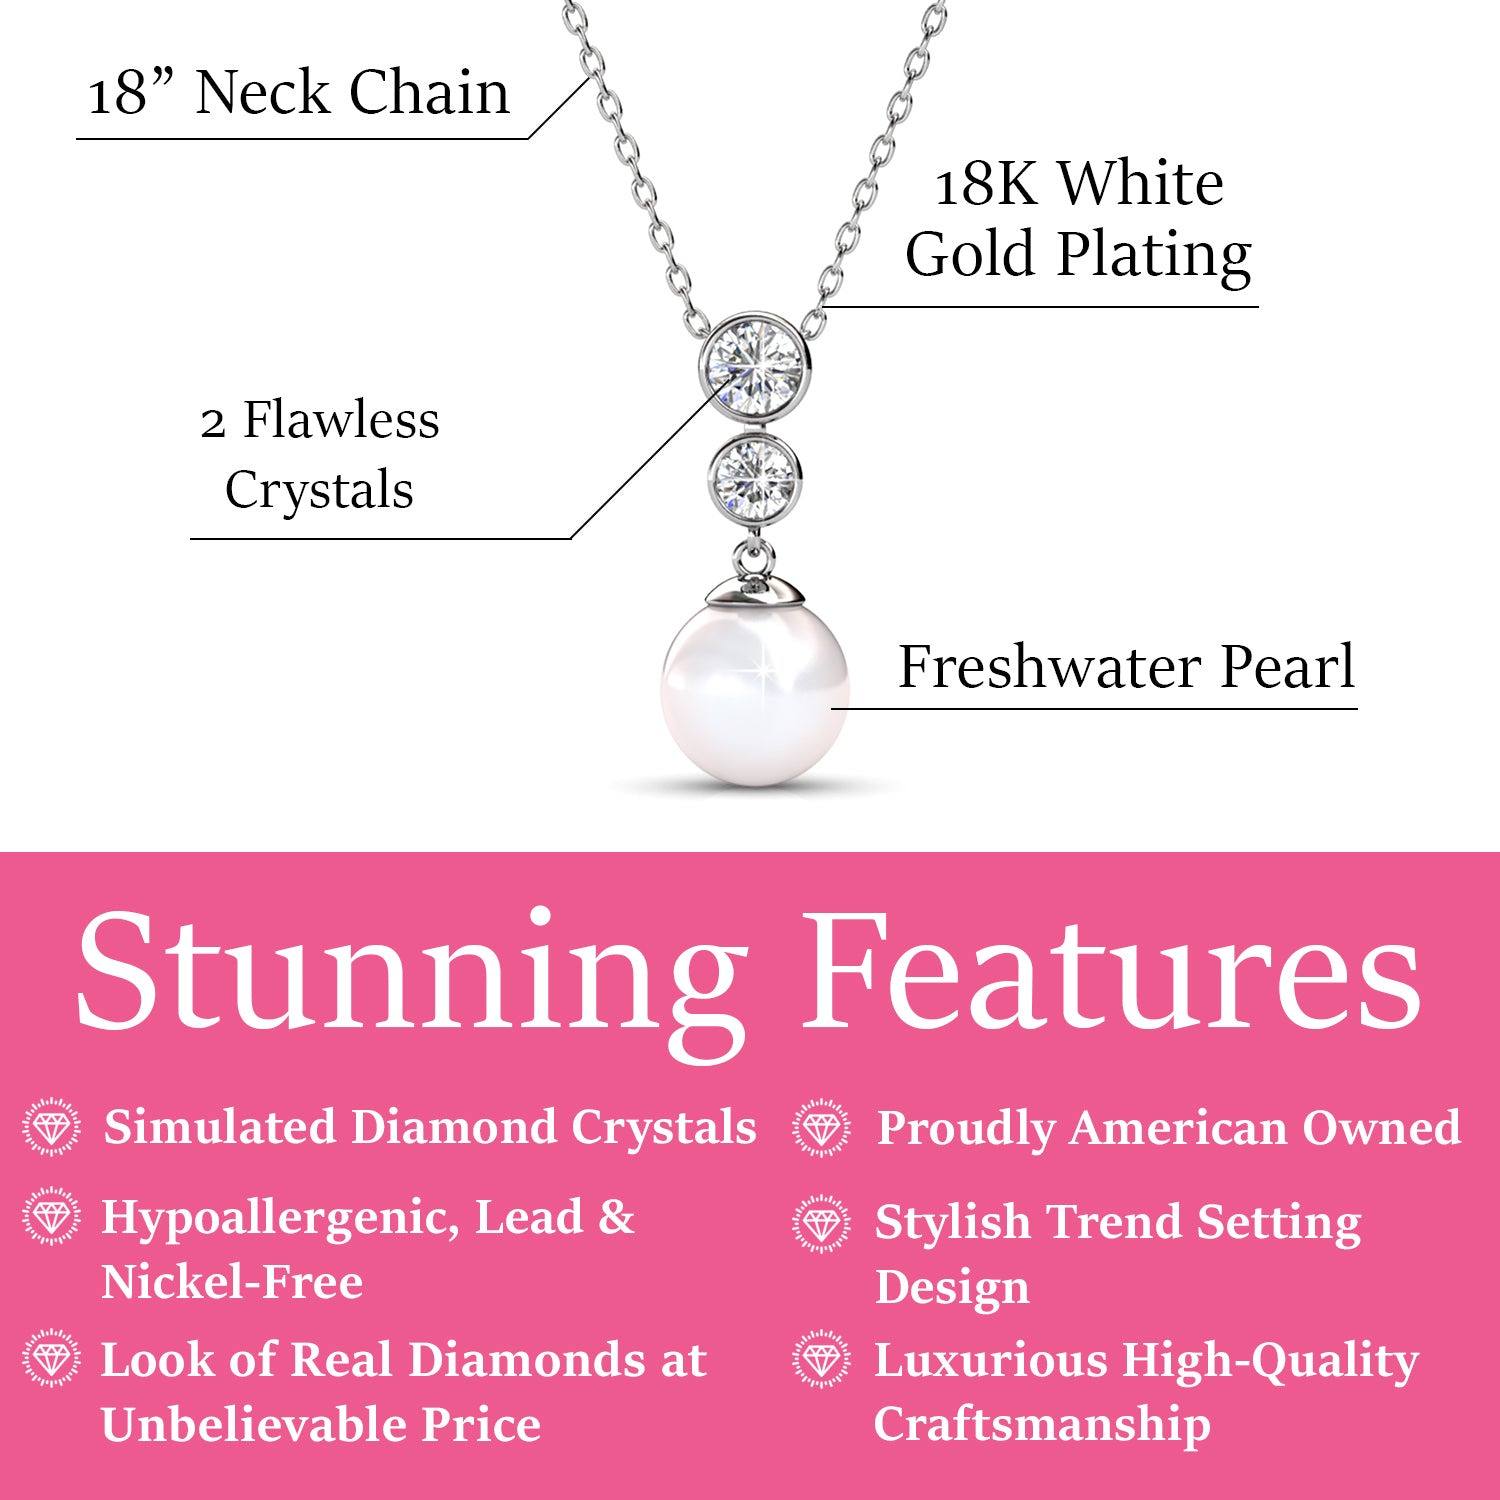 Genevieve "Sweet Pearl" 18k White Gold Plated Pendant Necklace with Swarovski Crystals - Fab Friday